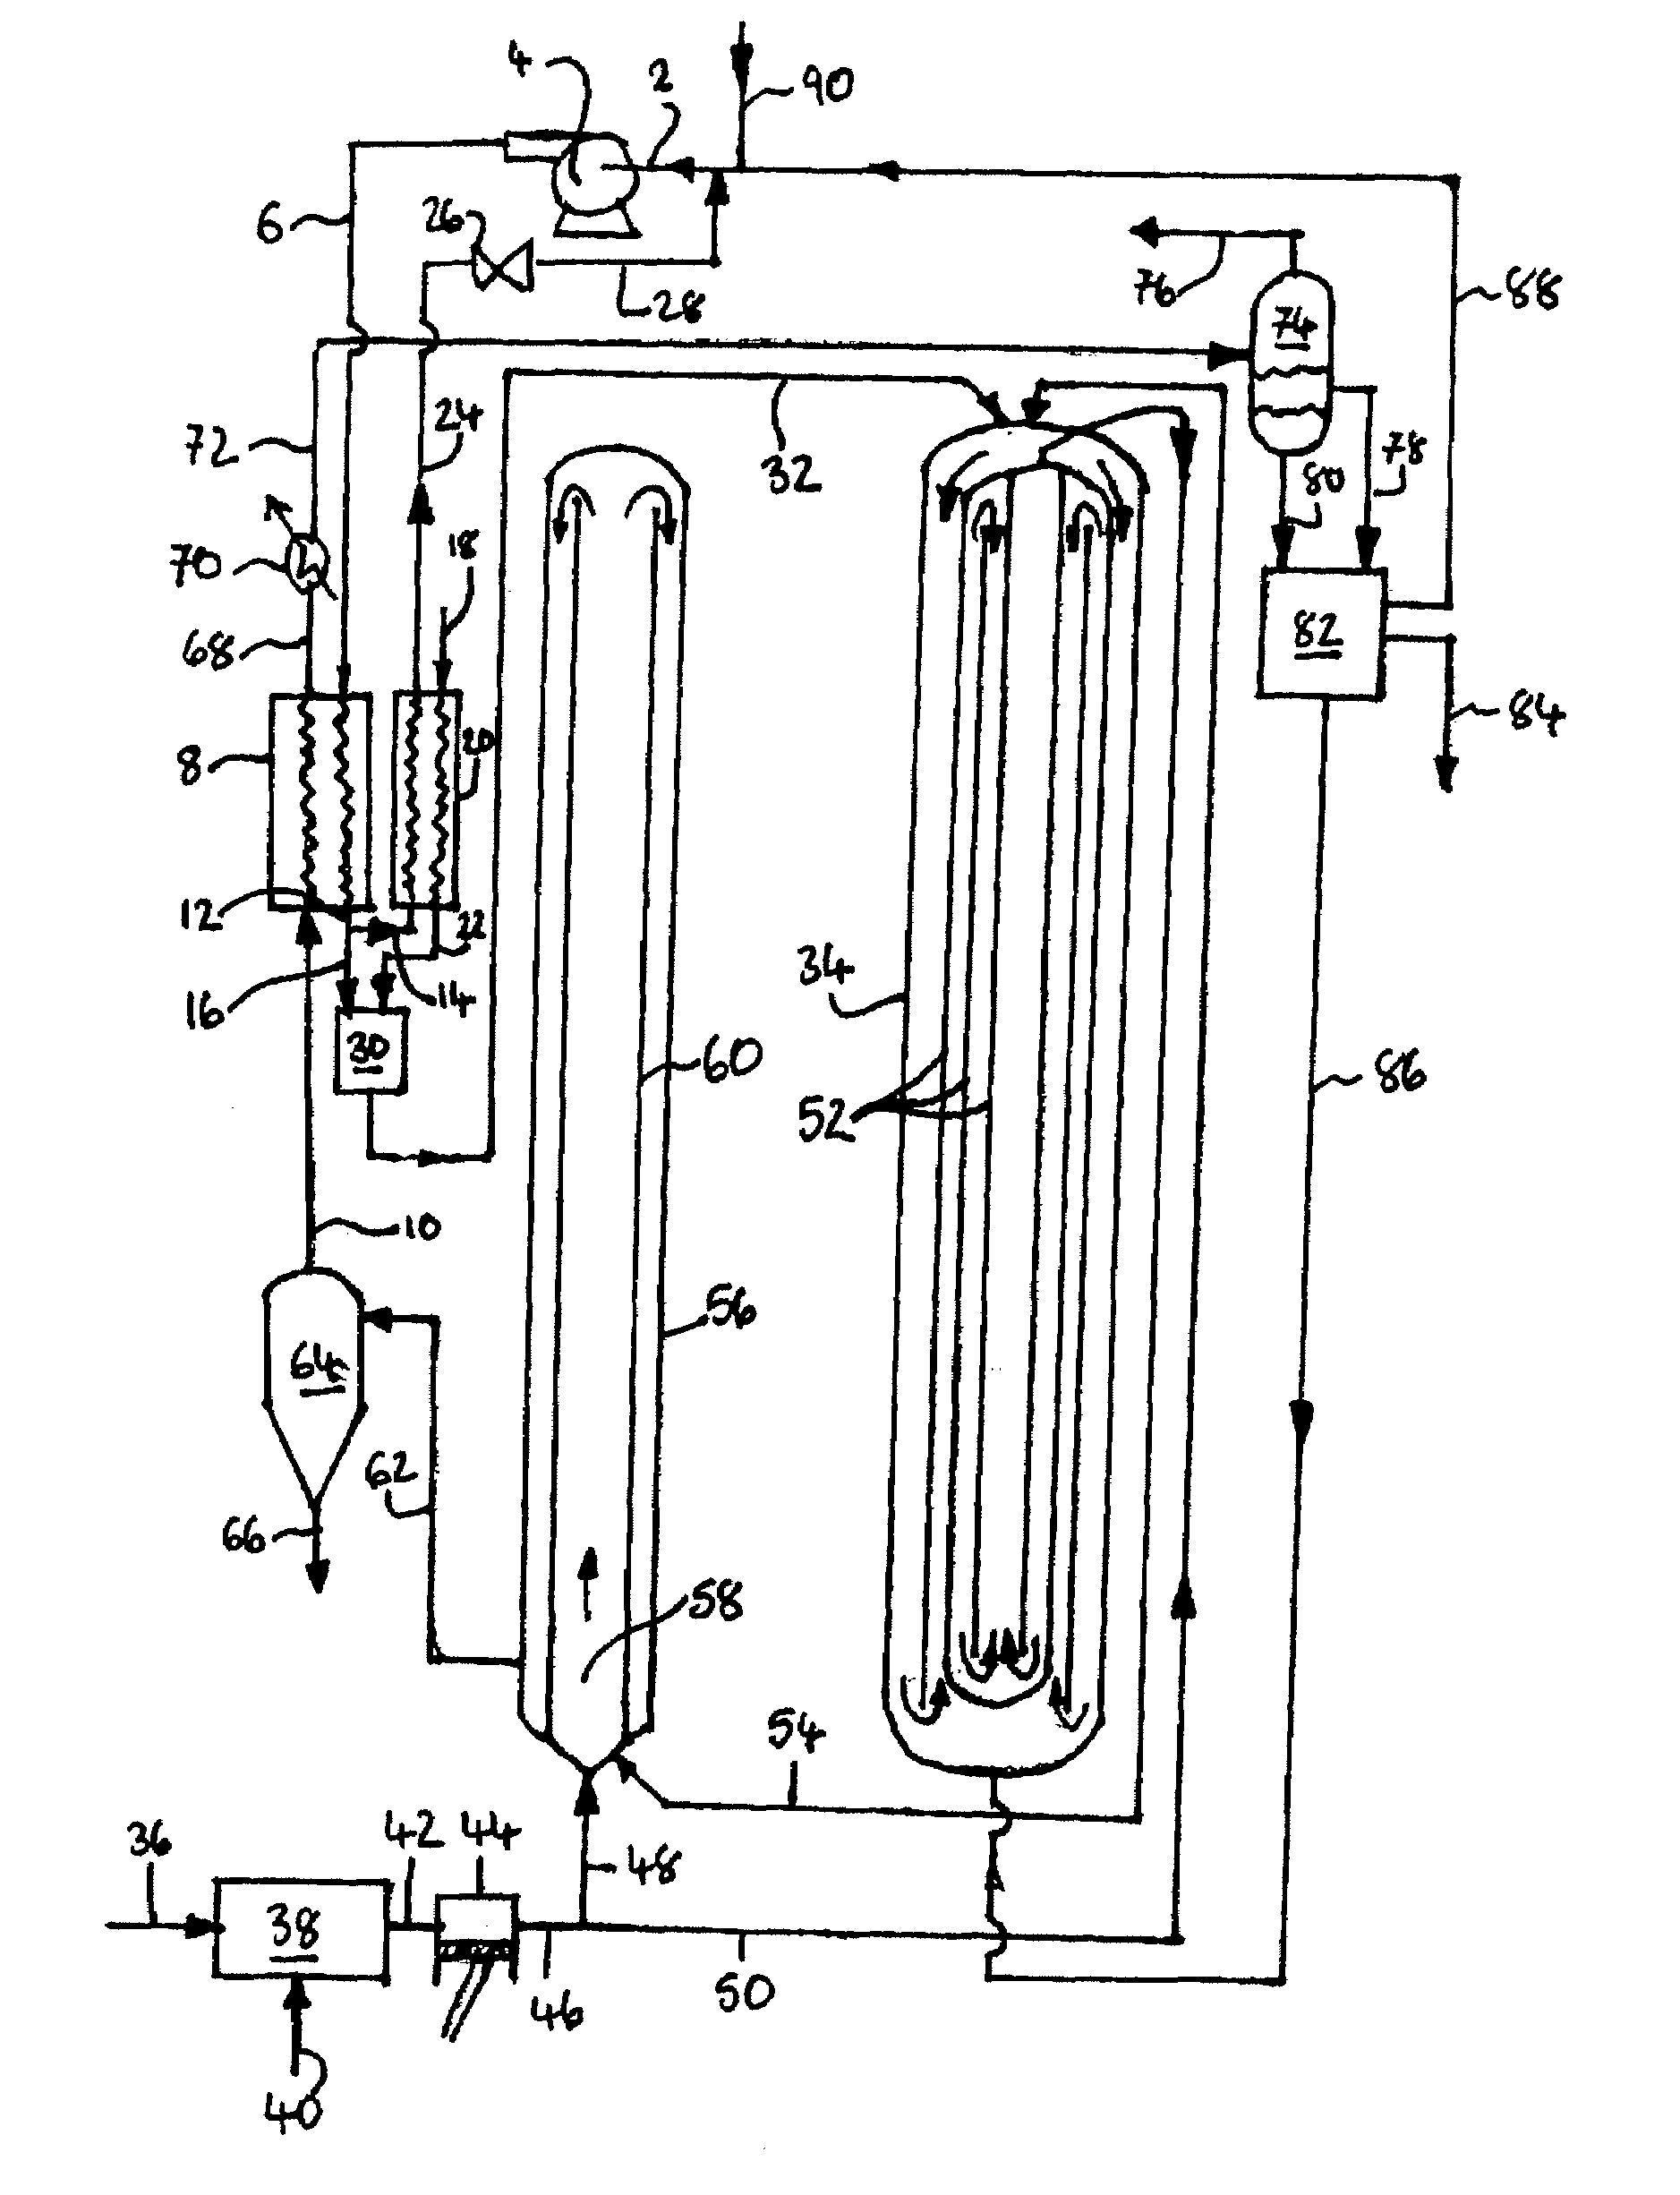 Process and apparatus for upgrading coal using supercritical water